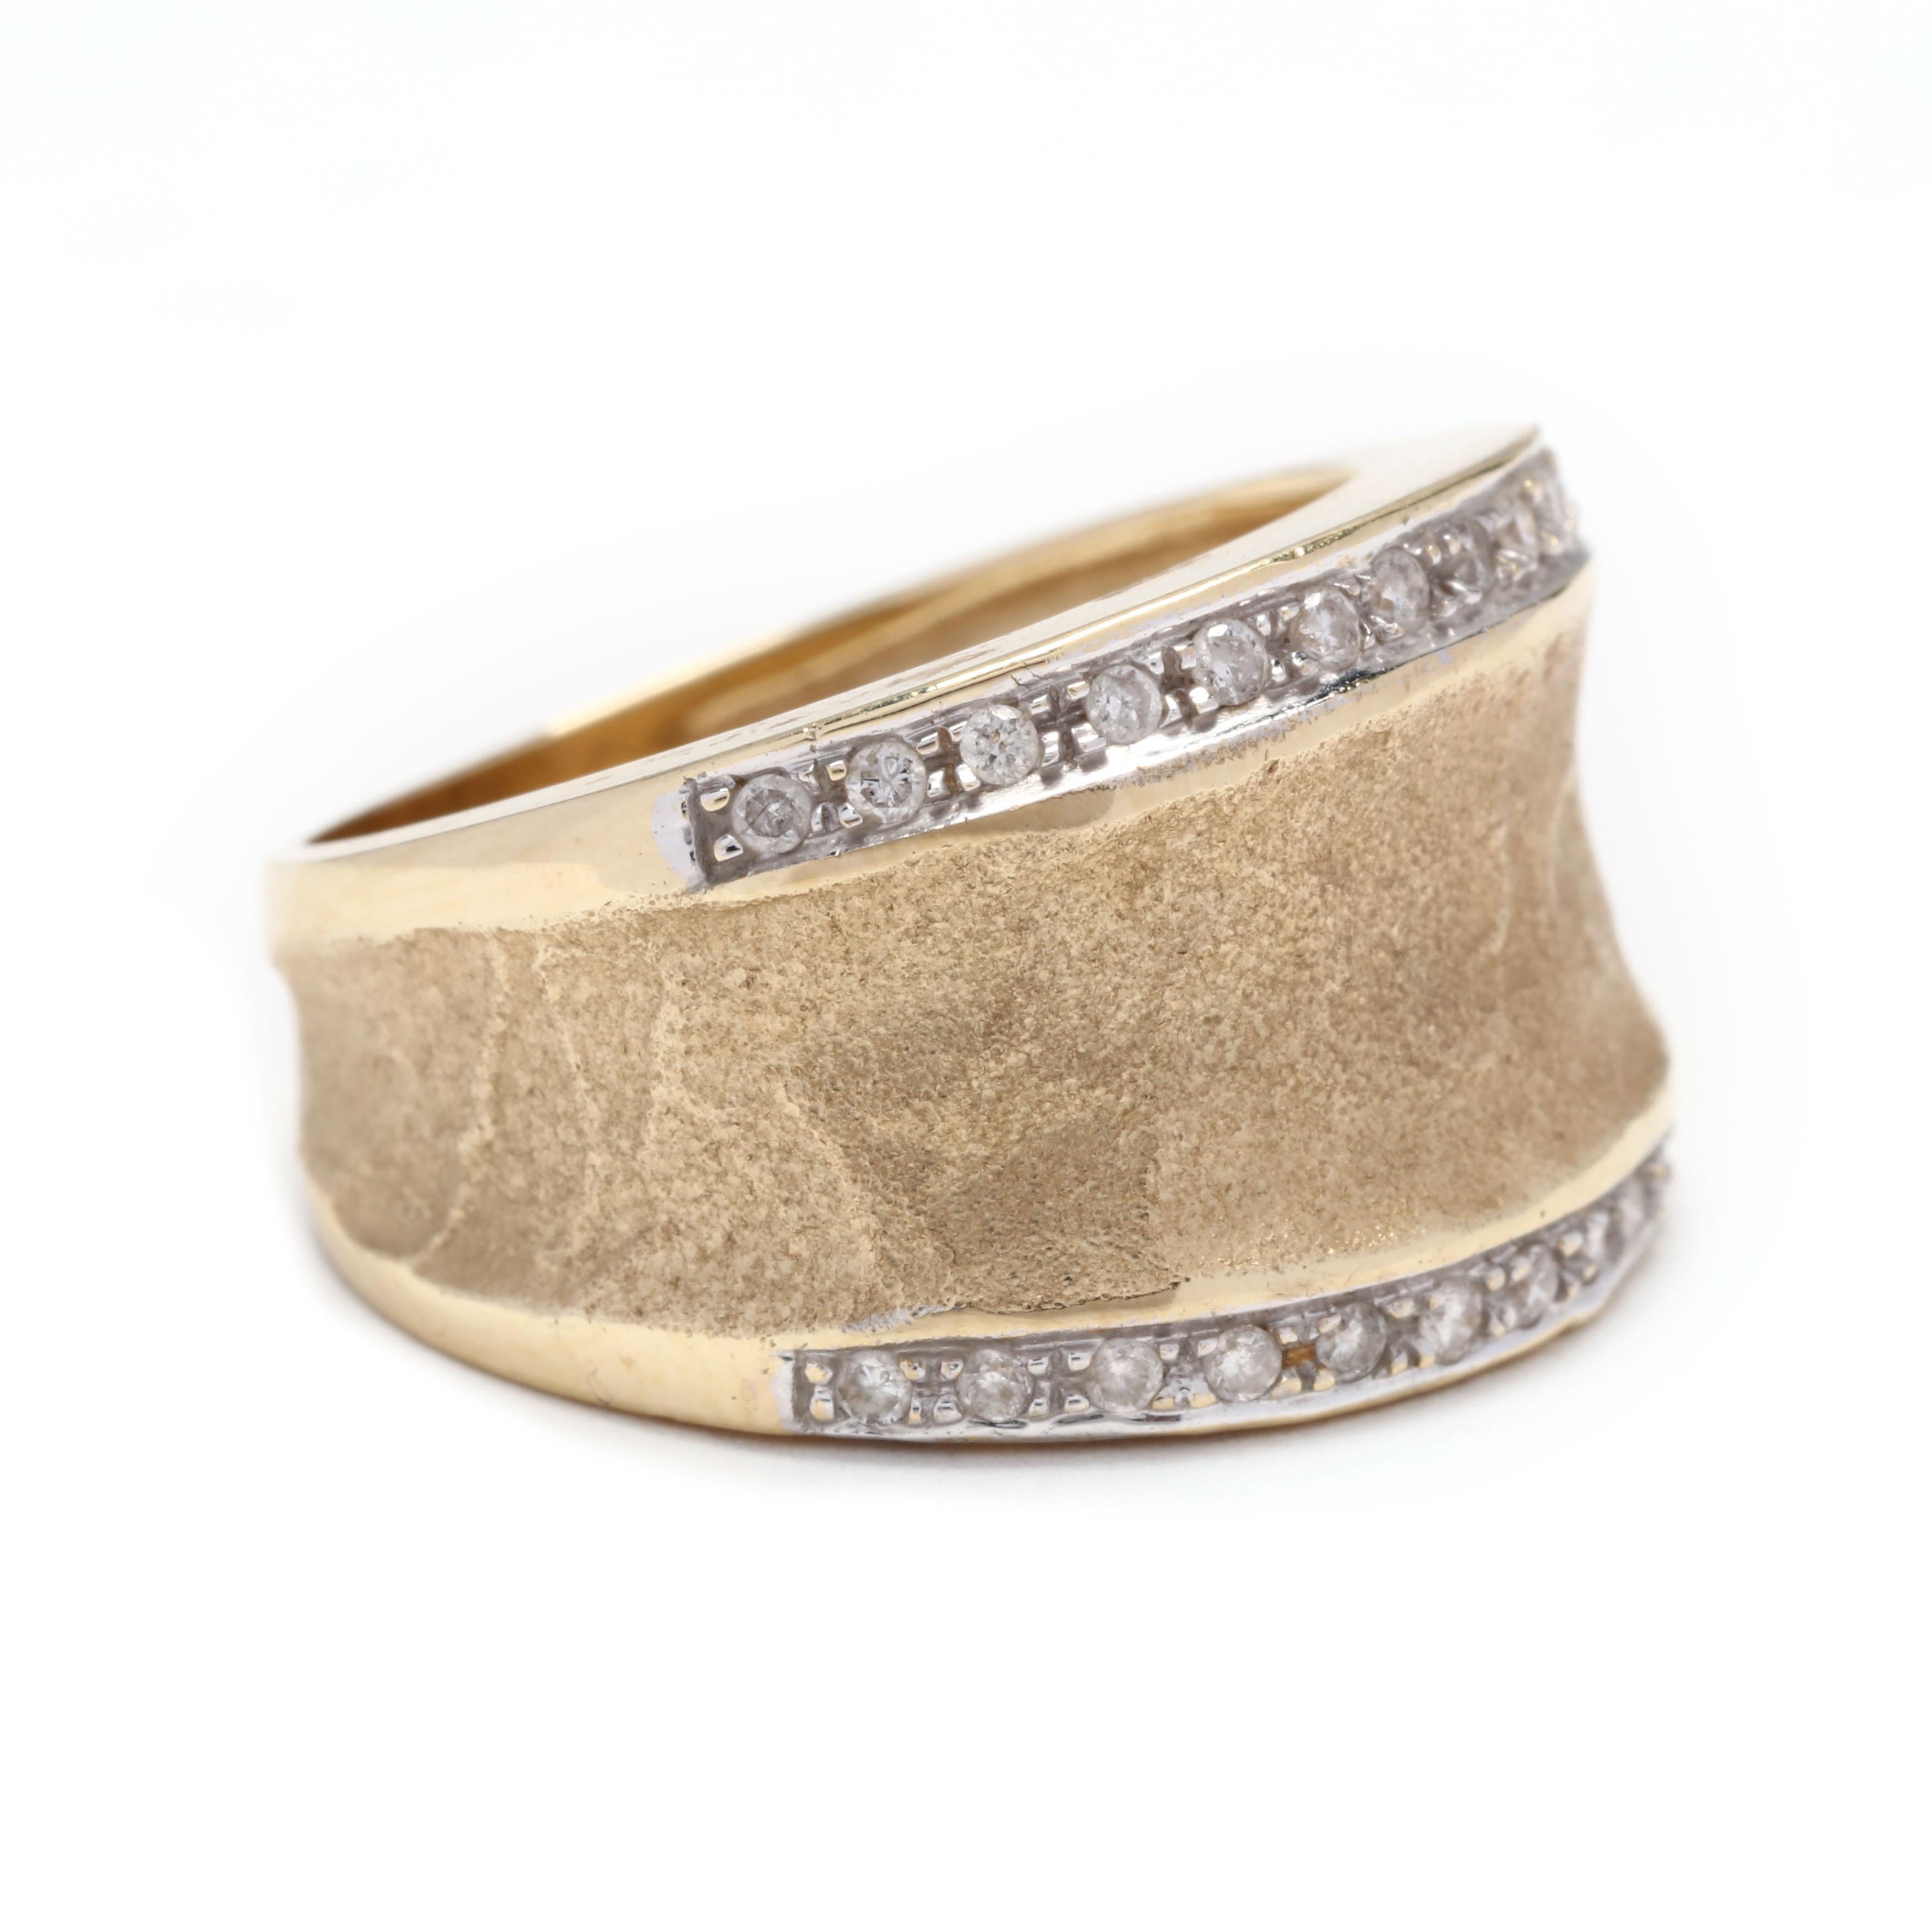 A 14 karat yellow and white gold diamond concave hammered wide band. This band features a wide concave tapered design with a matte hammered finish in the center and a row of pavé set diamonds on either side weighing approximately .26 total